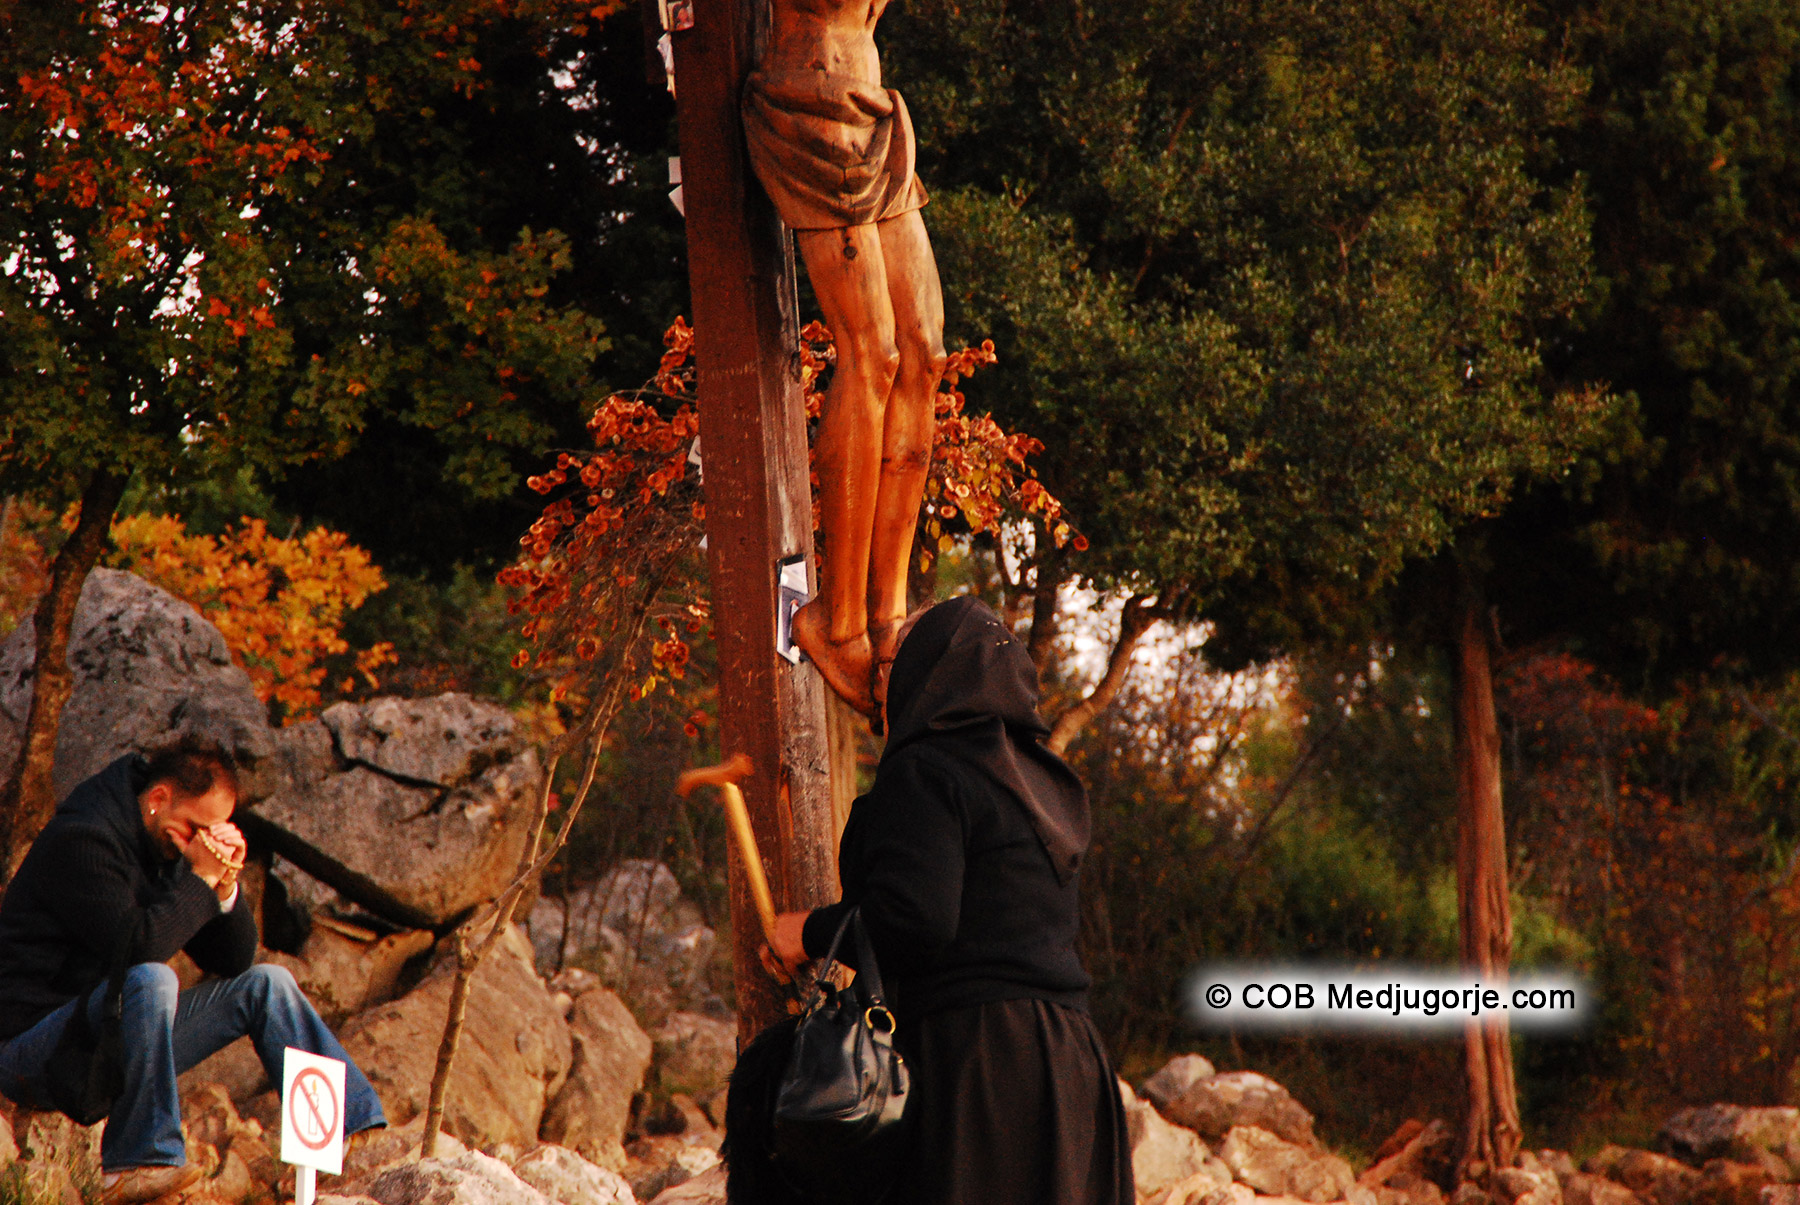 A pilgrim on Apparition Mountain in Medjugorje